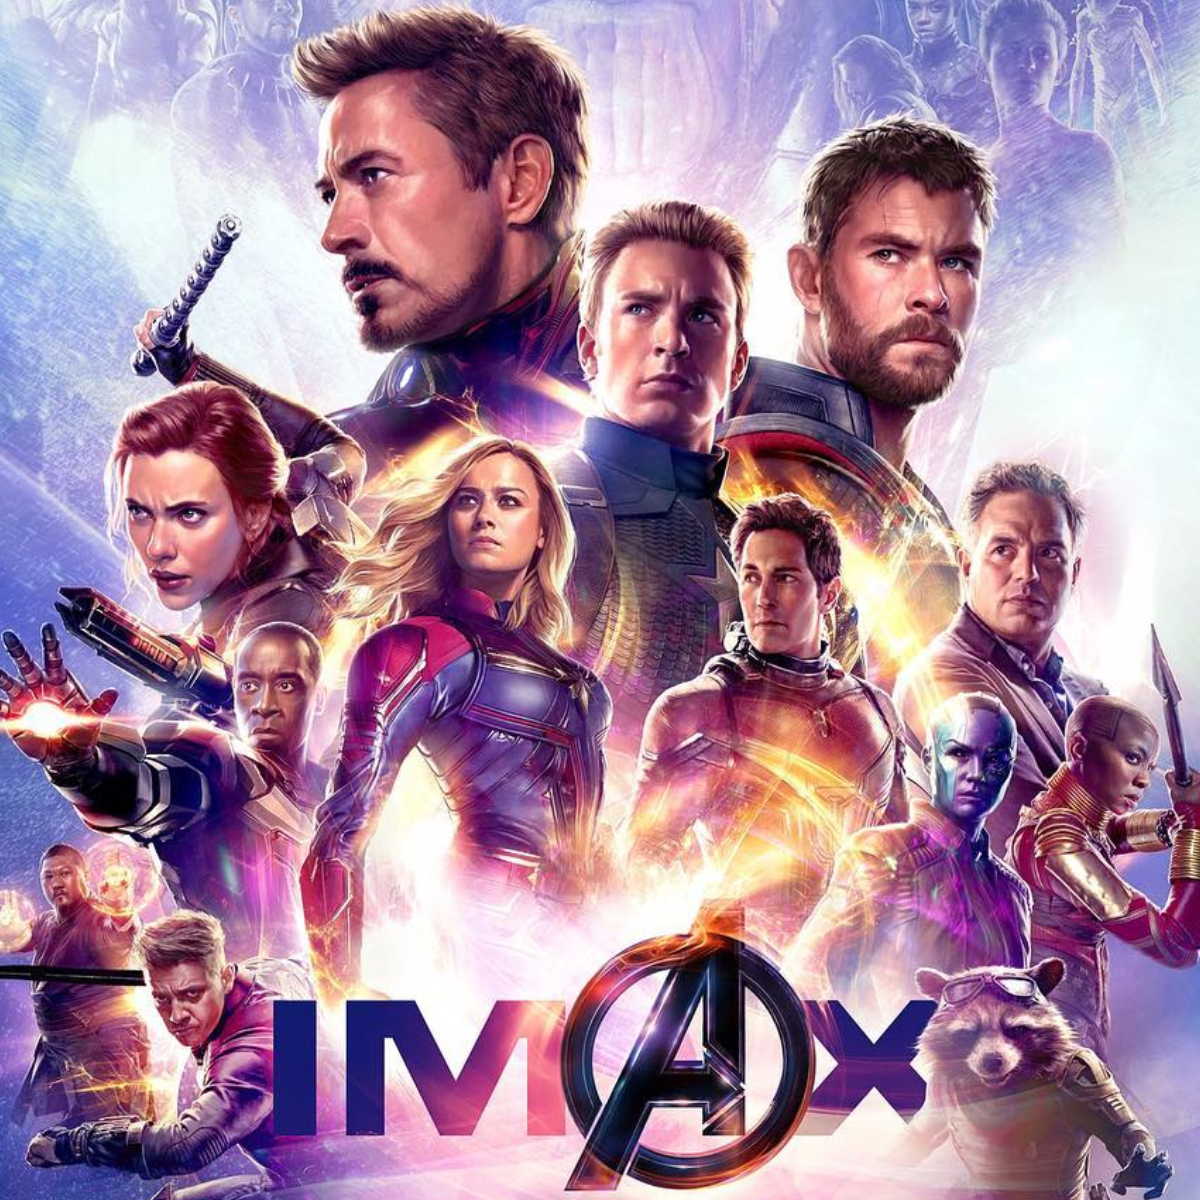 Avengers: Endgame re releasing with additional footage a ploy to beat Avatar's lifetime box office collection?